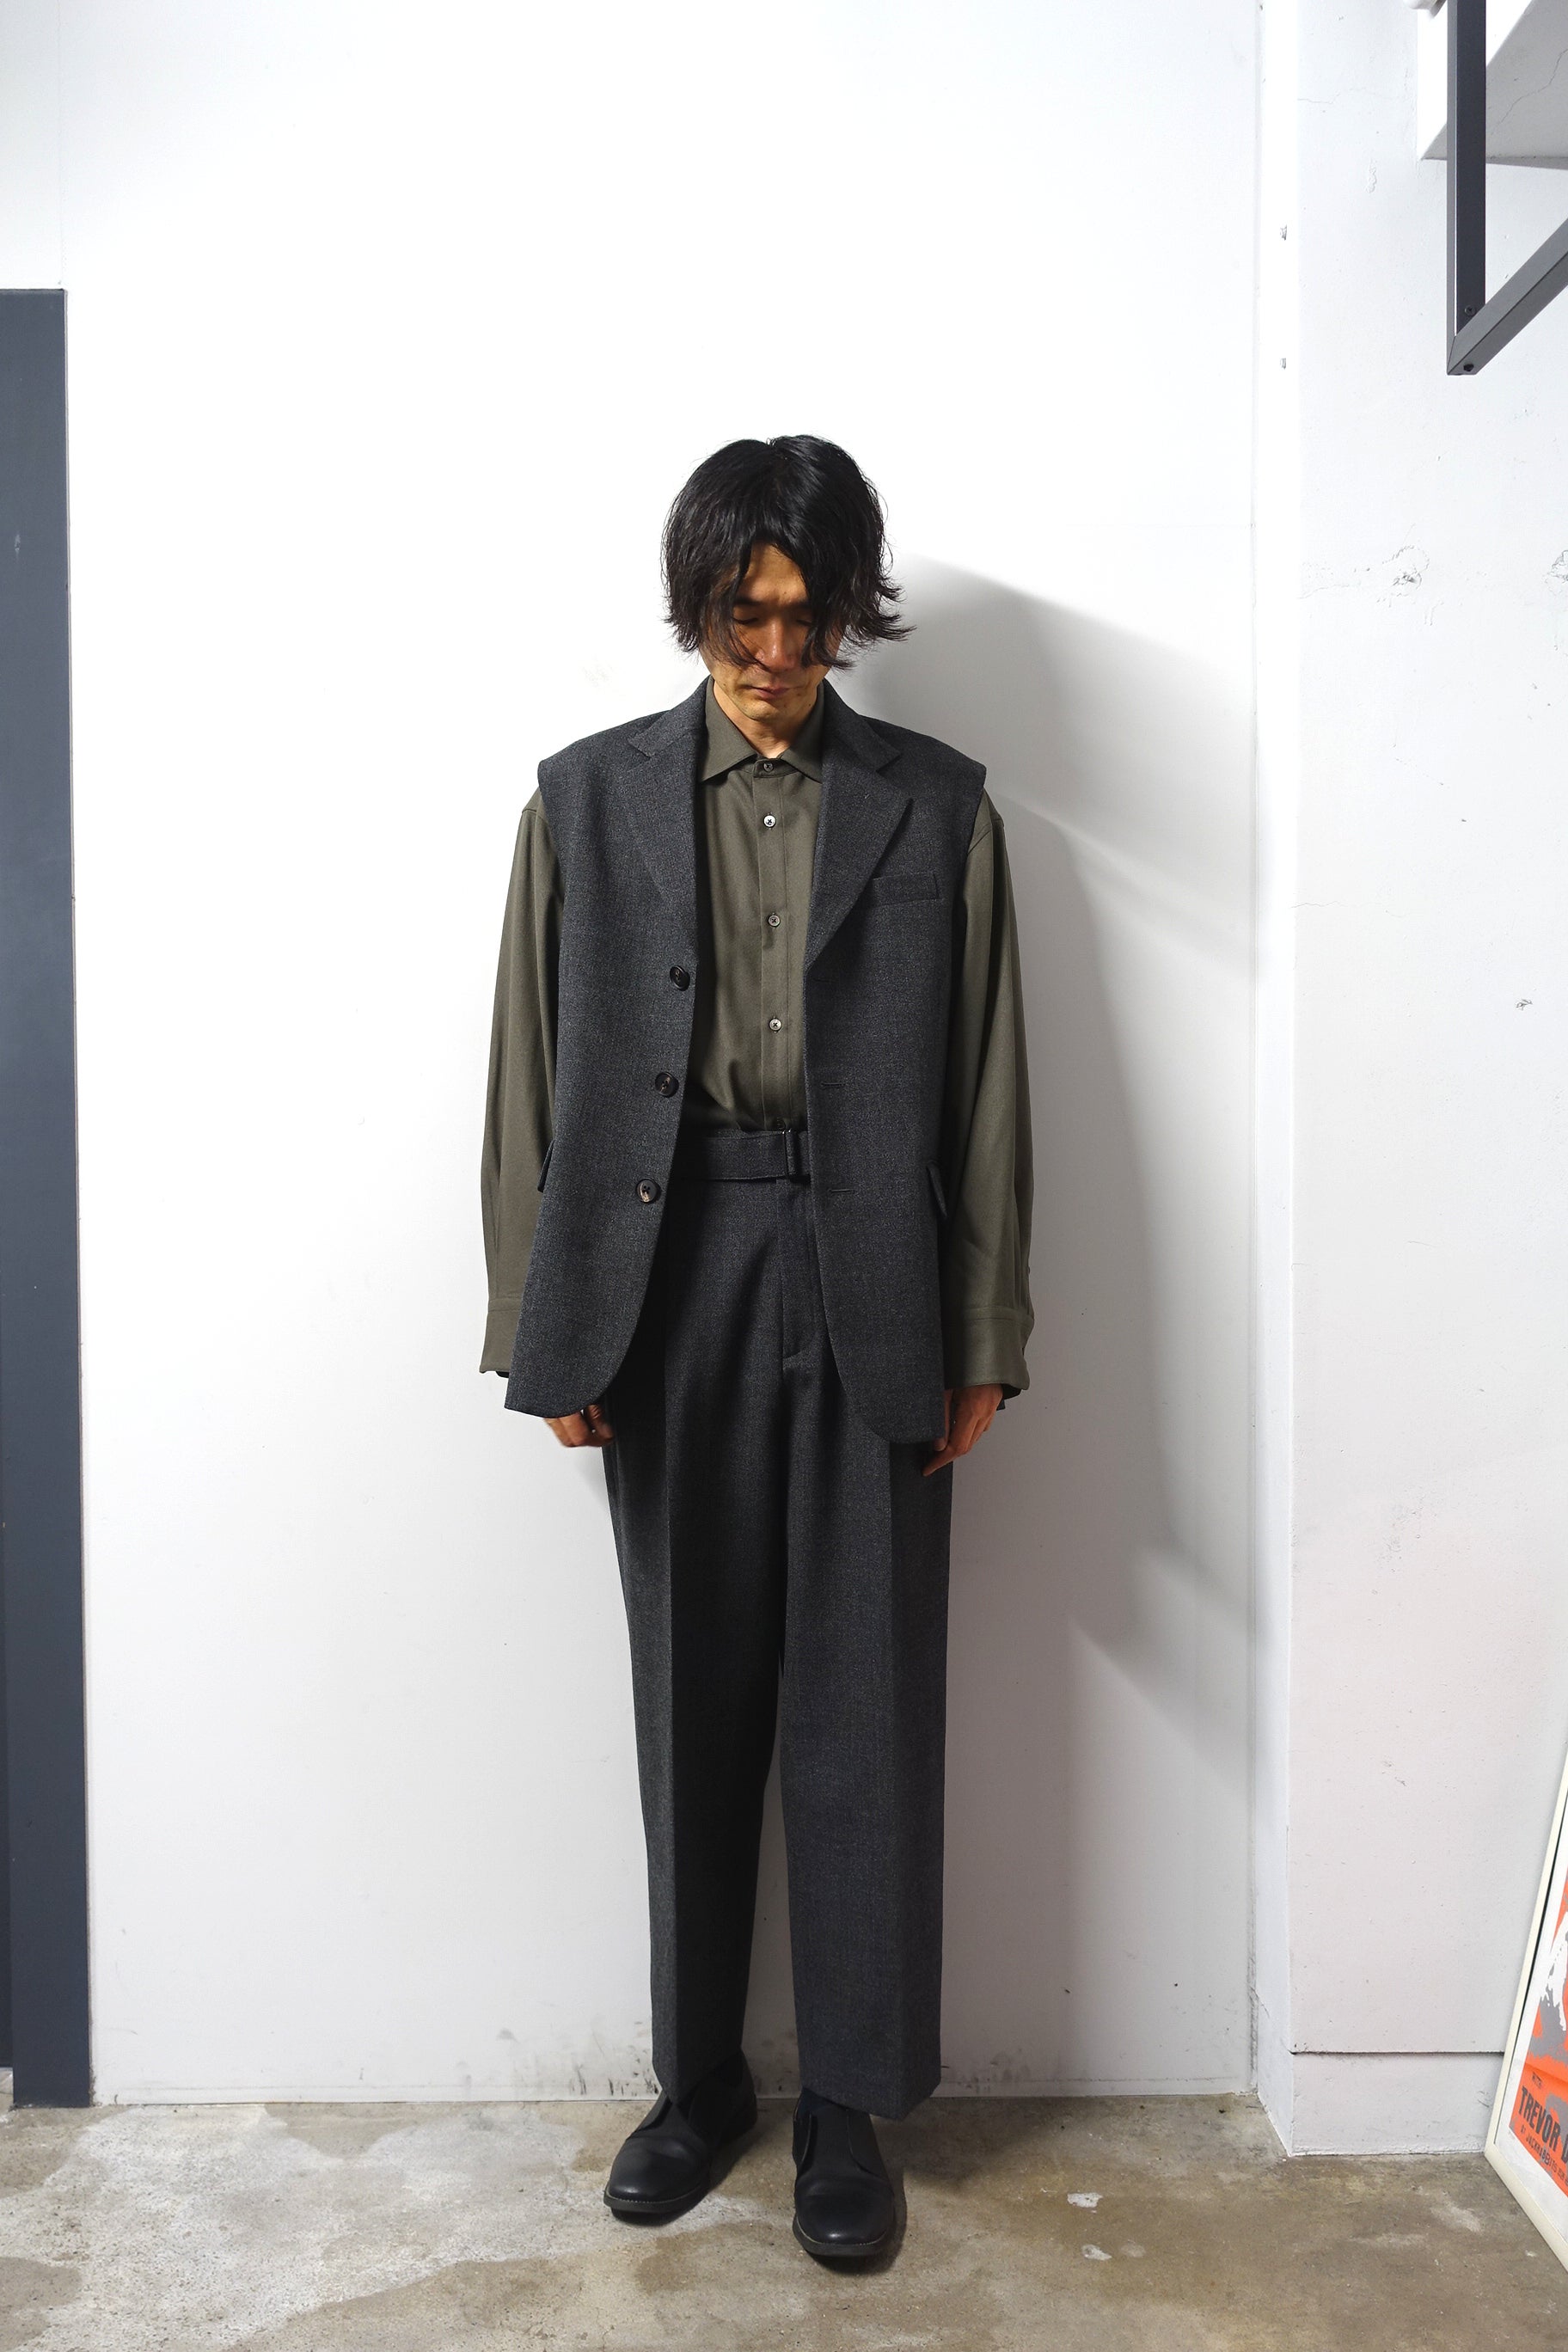 stein BELTED WIDE STRAIGHT TROUSERS 黒ウエストの長さを知りたいです